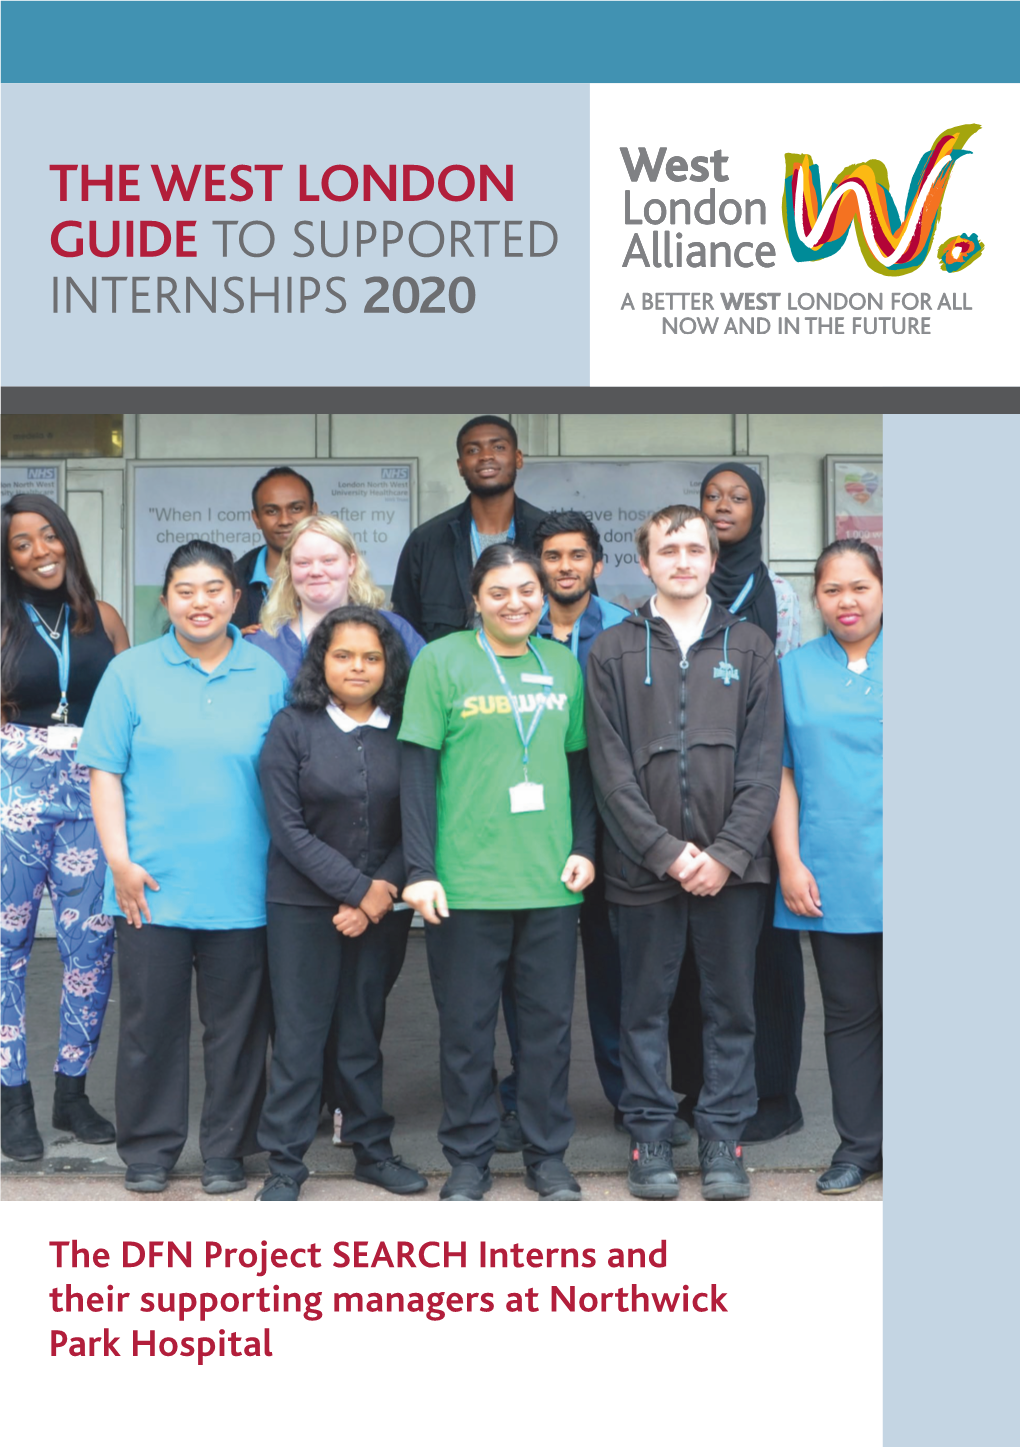 The West London Guide to Supported Internships 2020